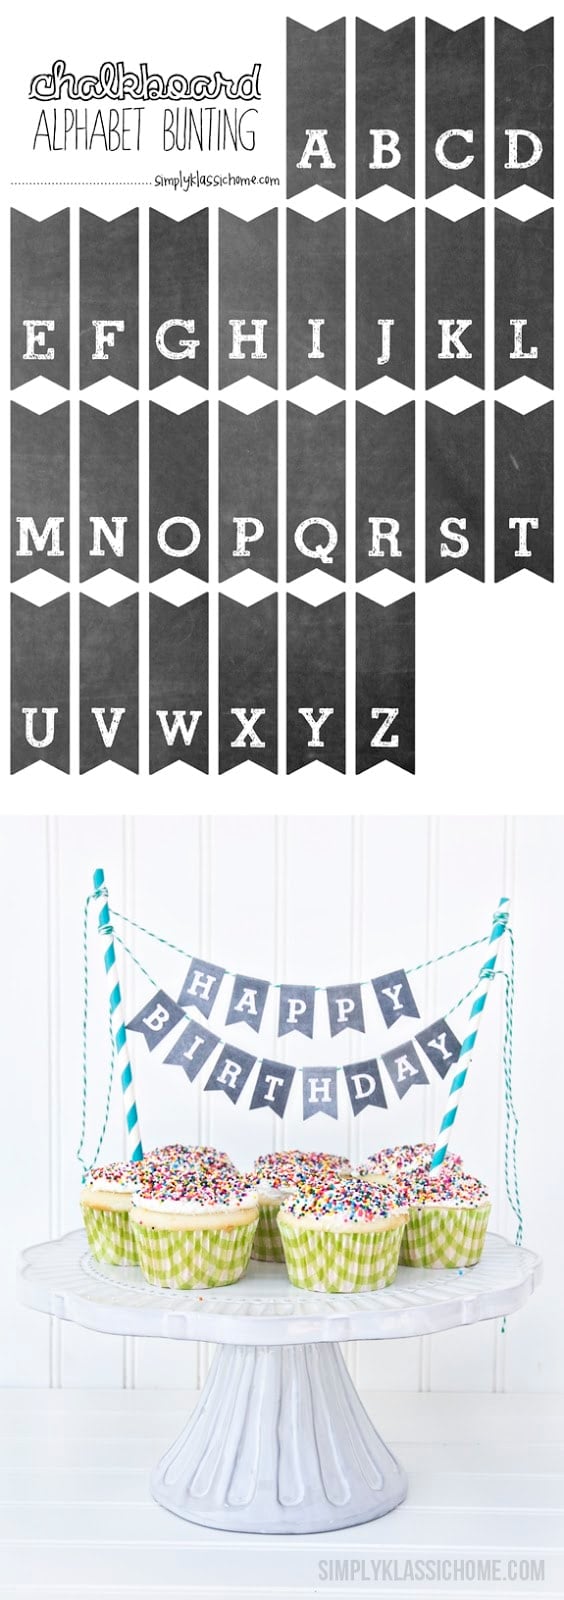 Printable Chalkboard Letters Bunting - Add some charm to your cakes, cupcakes and pies with this free printable download from Simply Klassic!